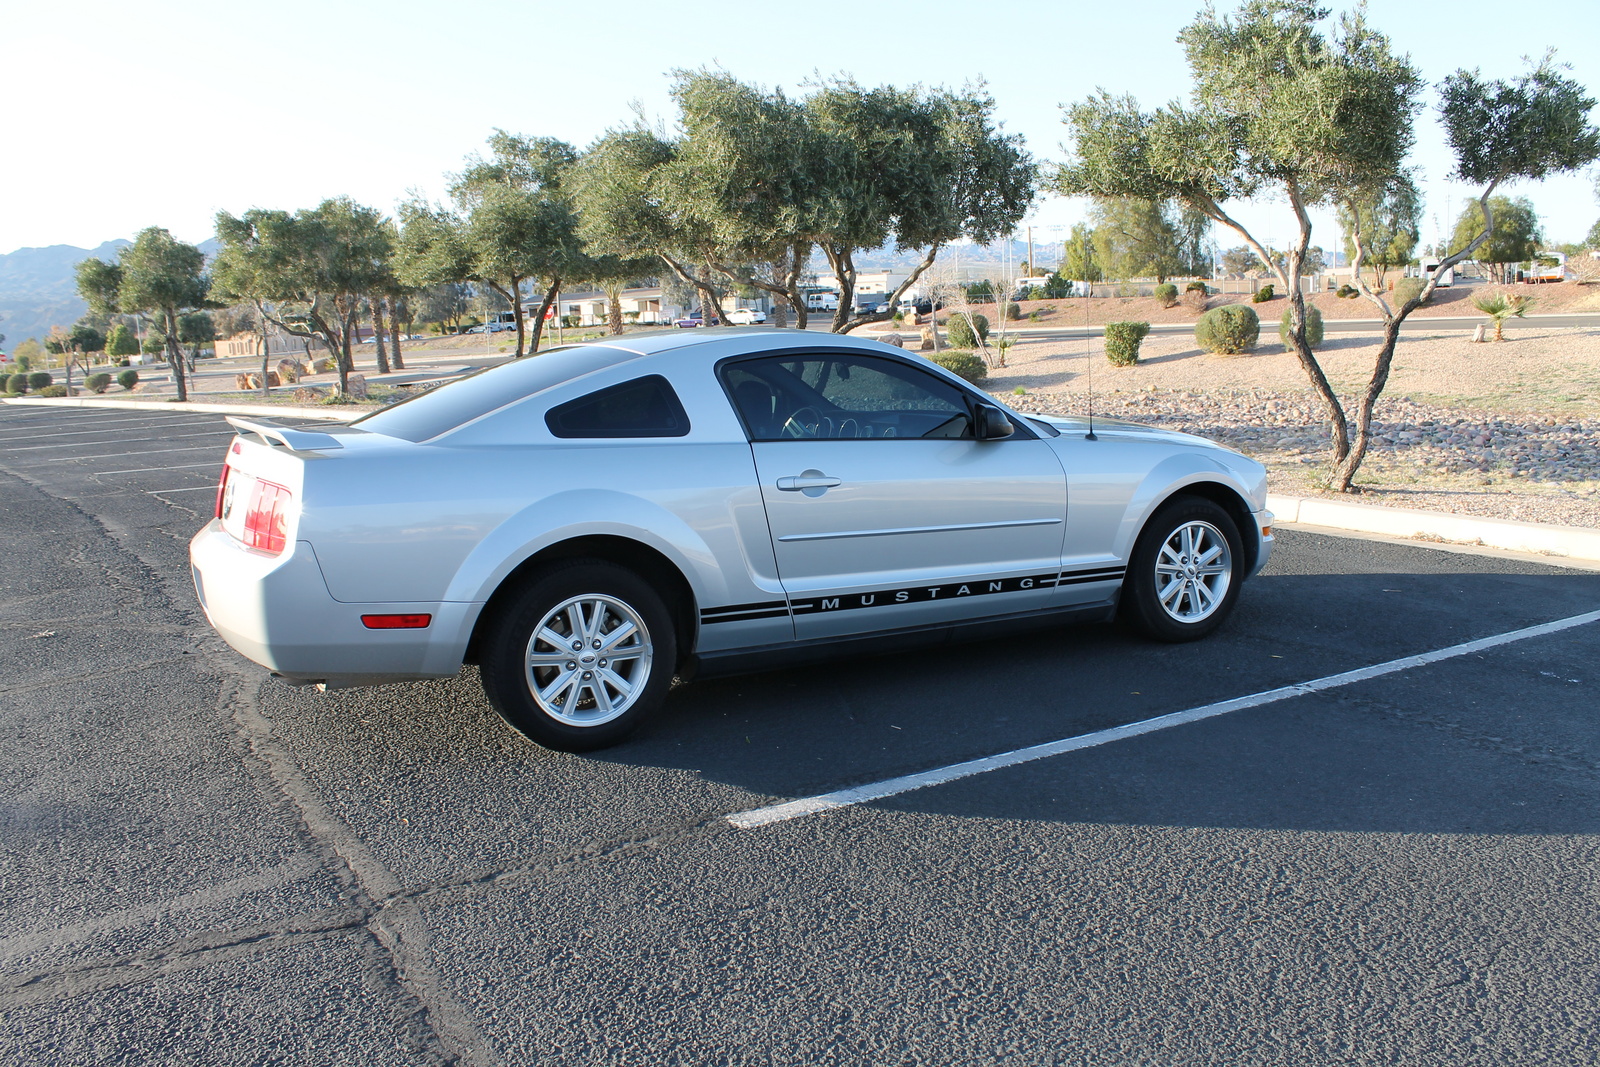 2006 Ford mustang deluxe review #7